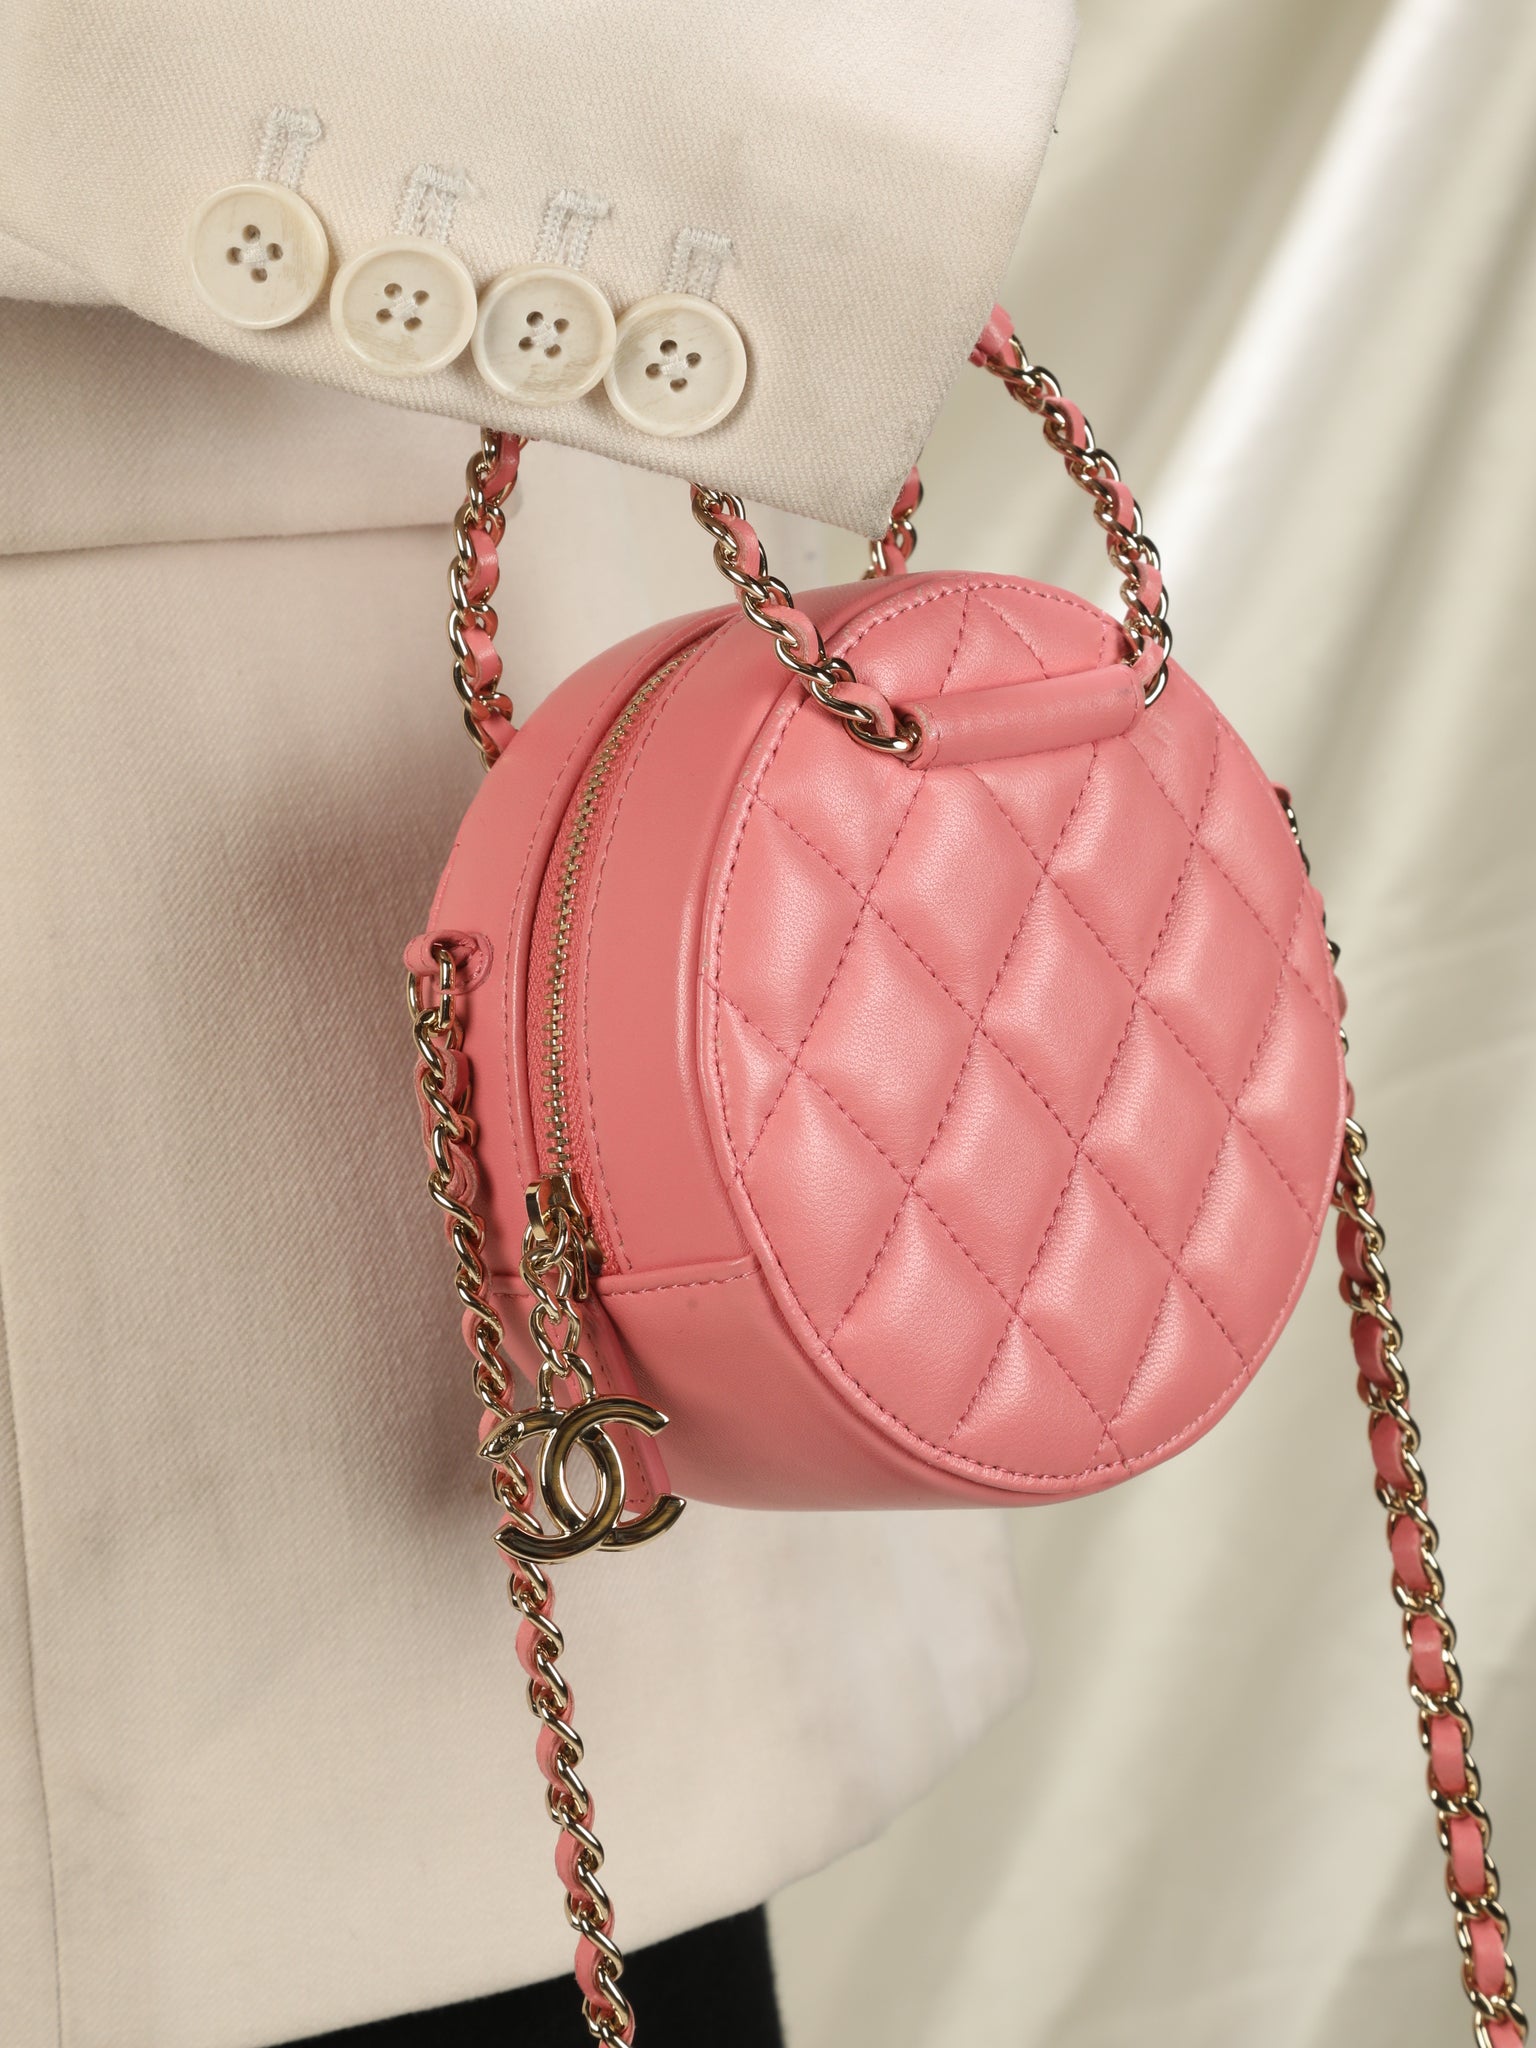 CHANEL Small Trendy CC Flap Bag with Top Handle in Pink Lambskin